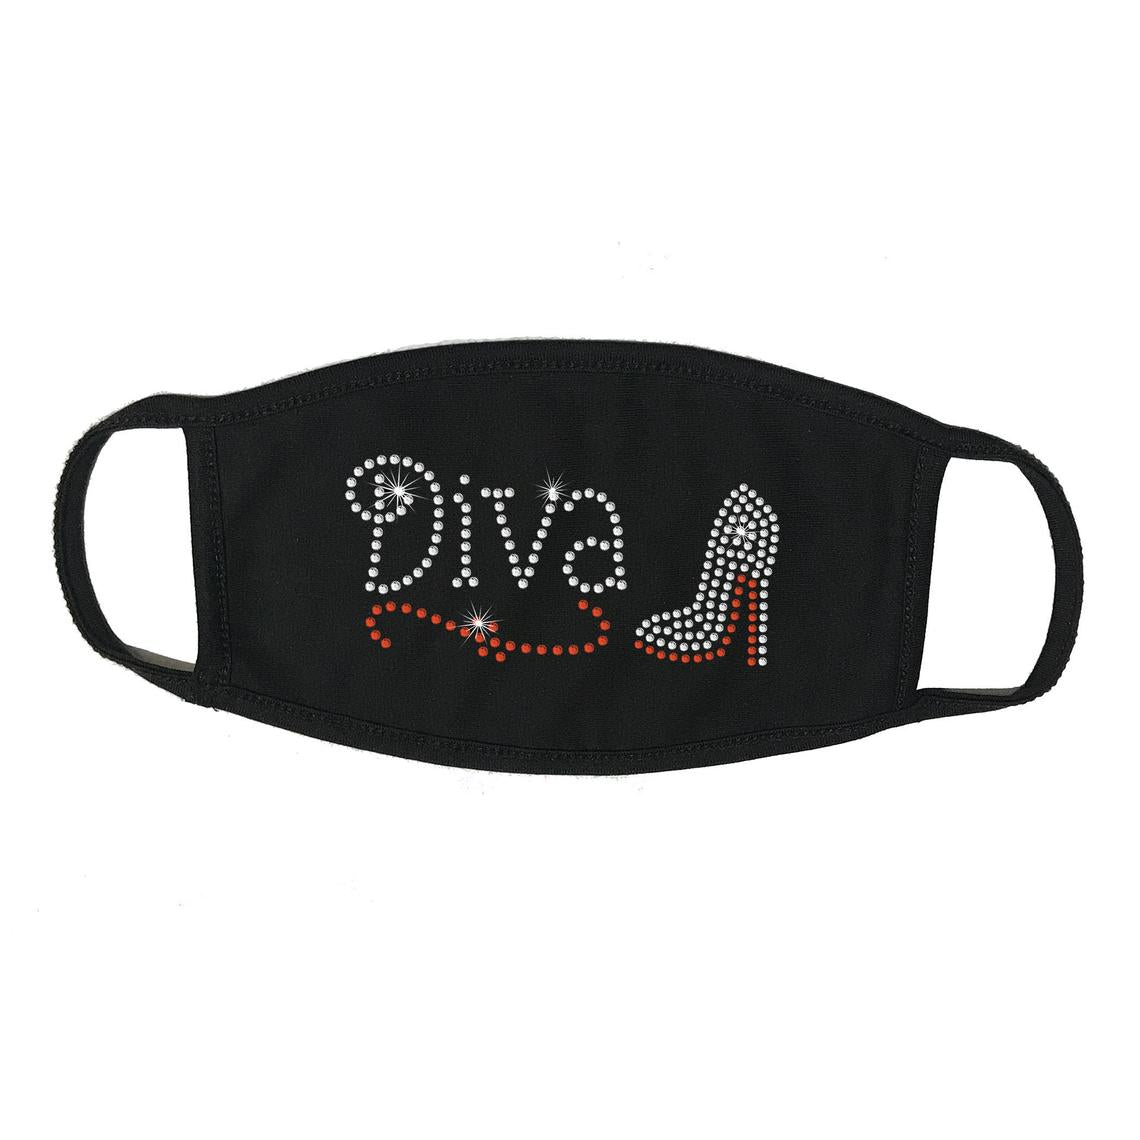 Rhinestone Embellished Black Face Mask with Face Cover, Diva with Heel